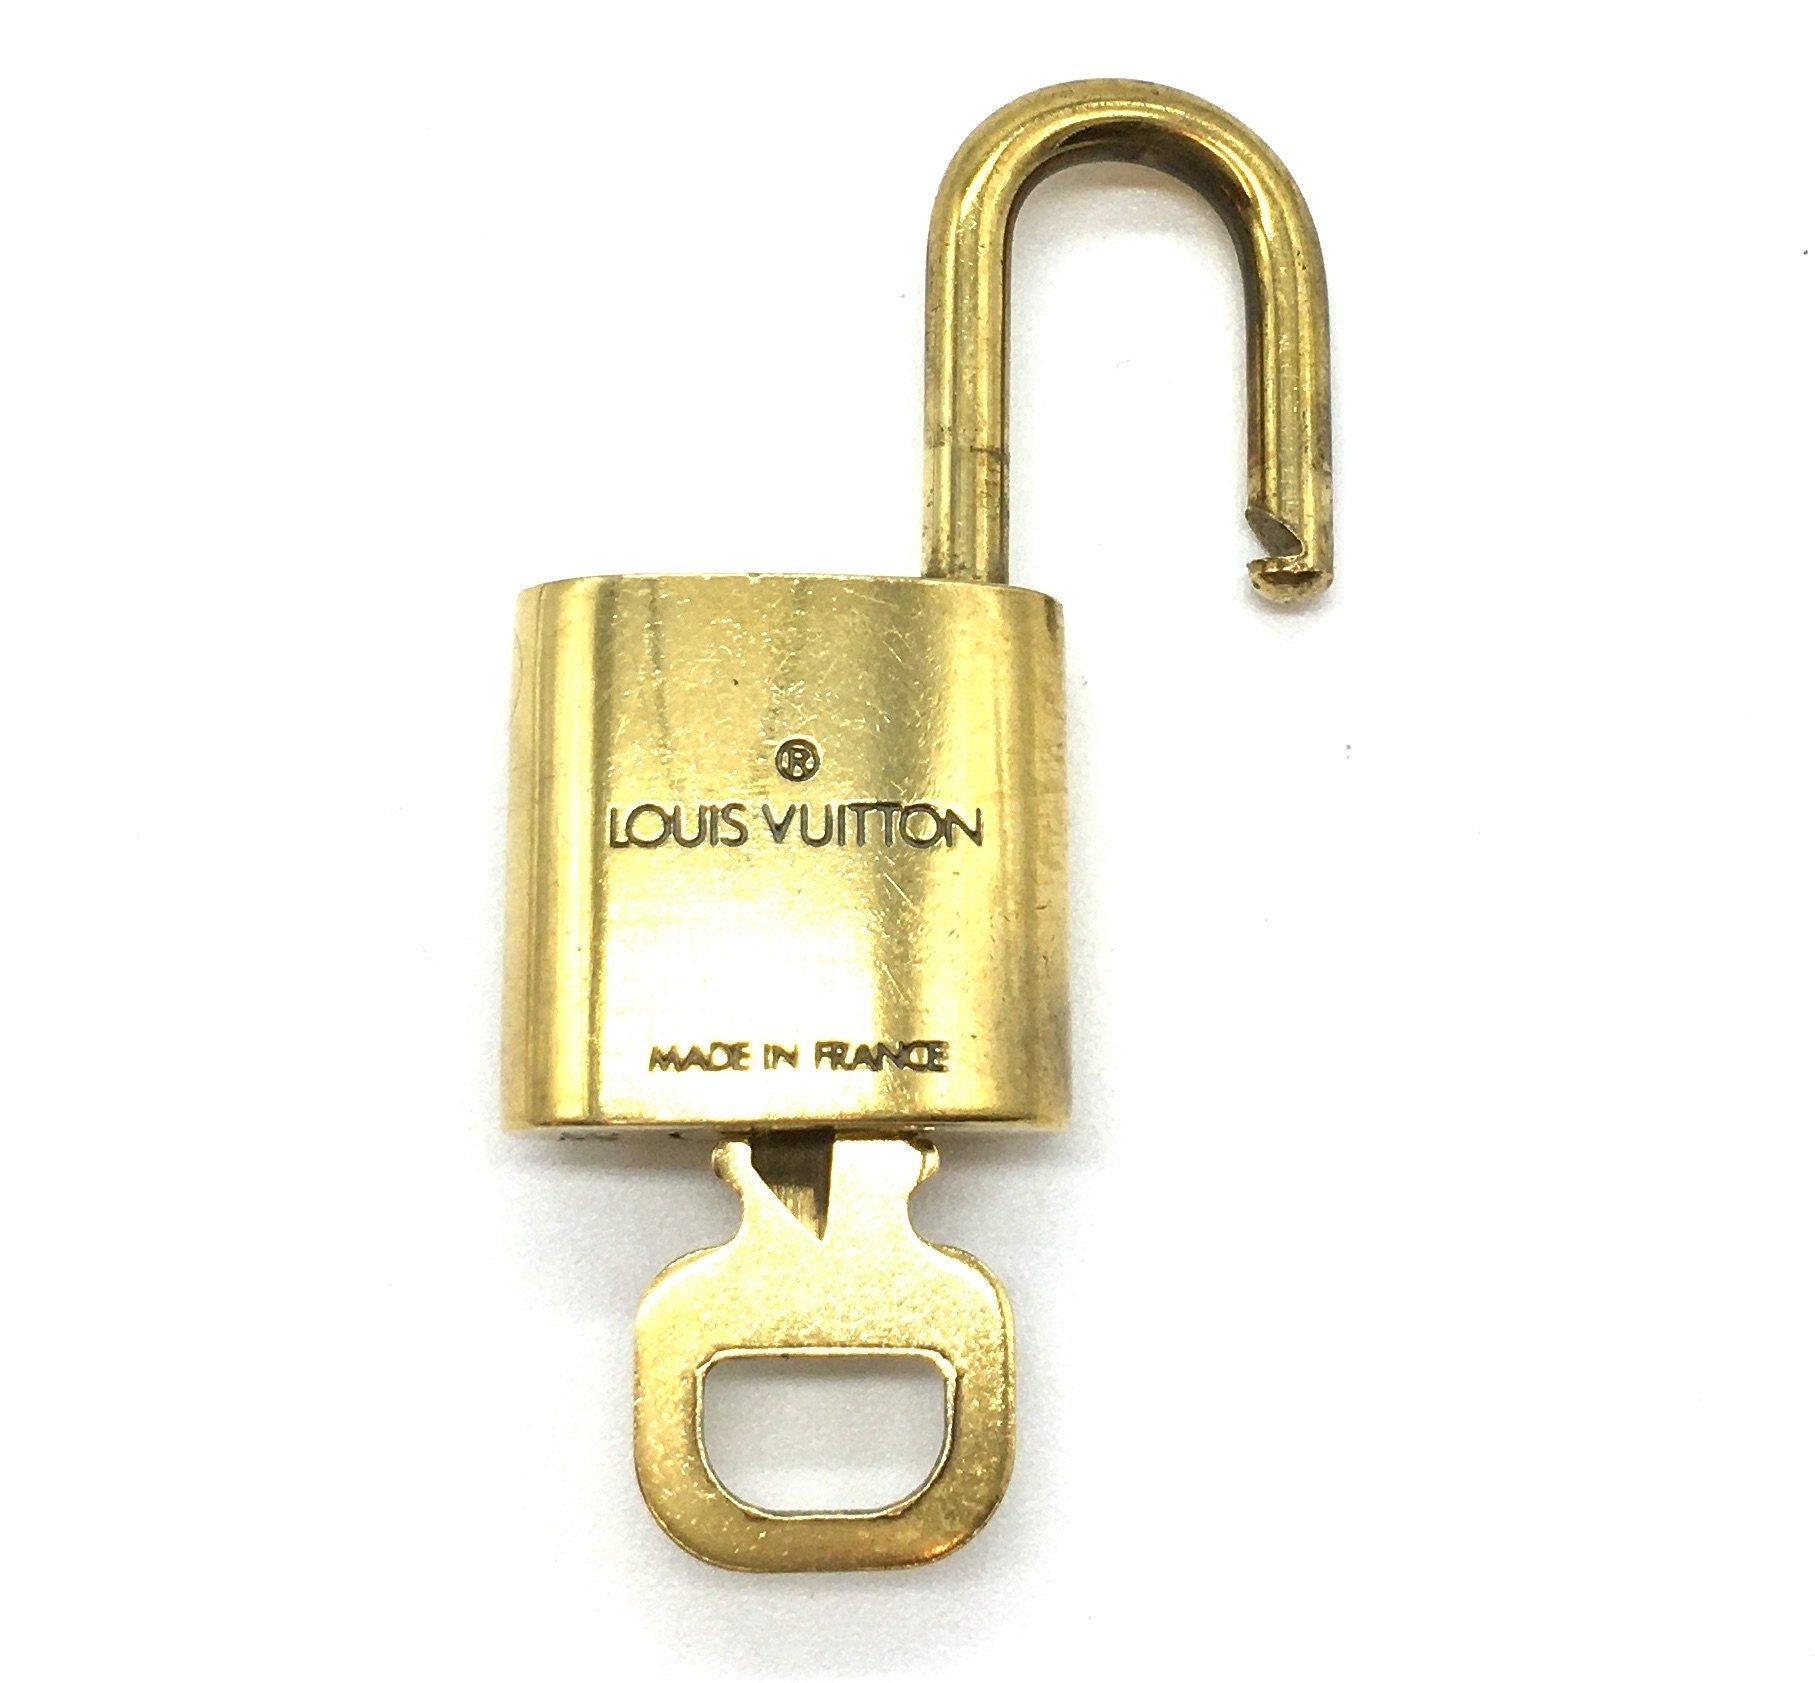 Vintage Gold Brass Lock and Key Set #319 by Louis Vuitton